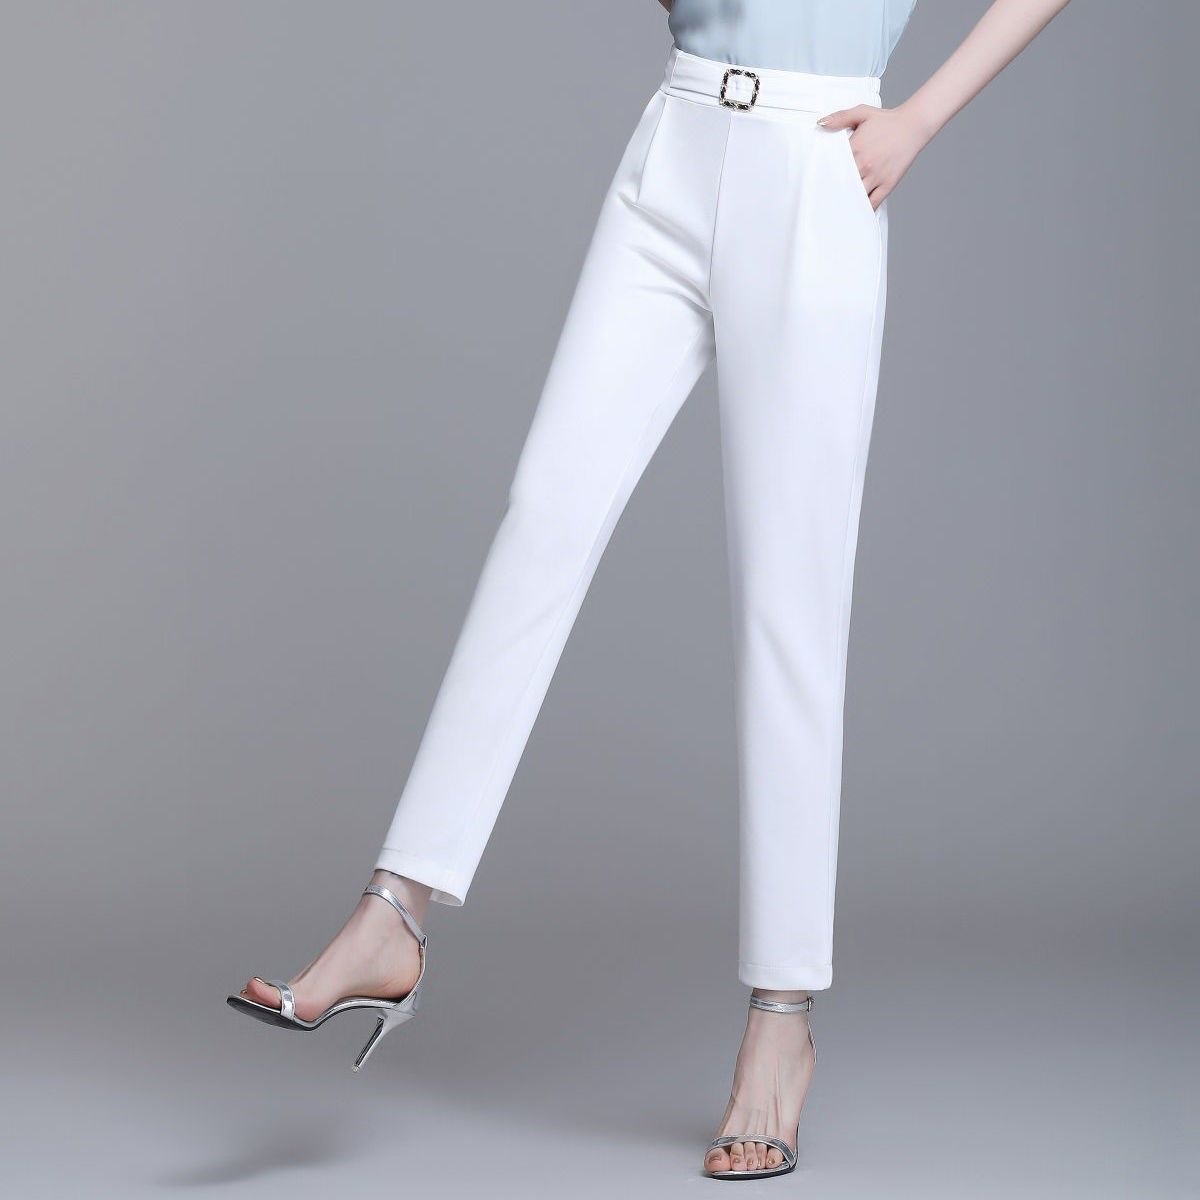 Nine points / trousers ice silk harem pants women's summer thin section high waist slim casual pants with a sense of drape and all-match skinny pants